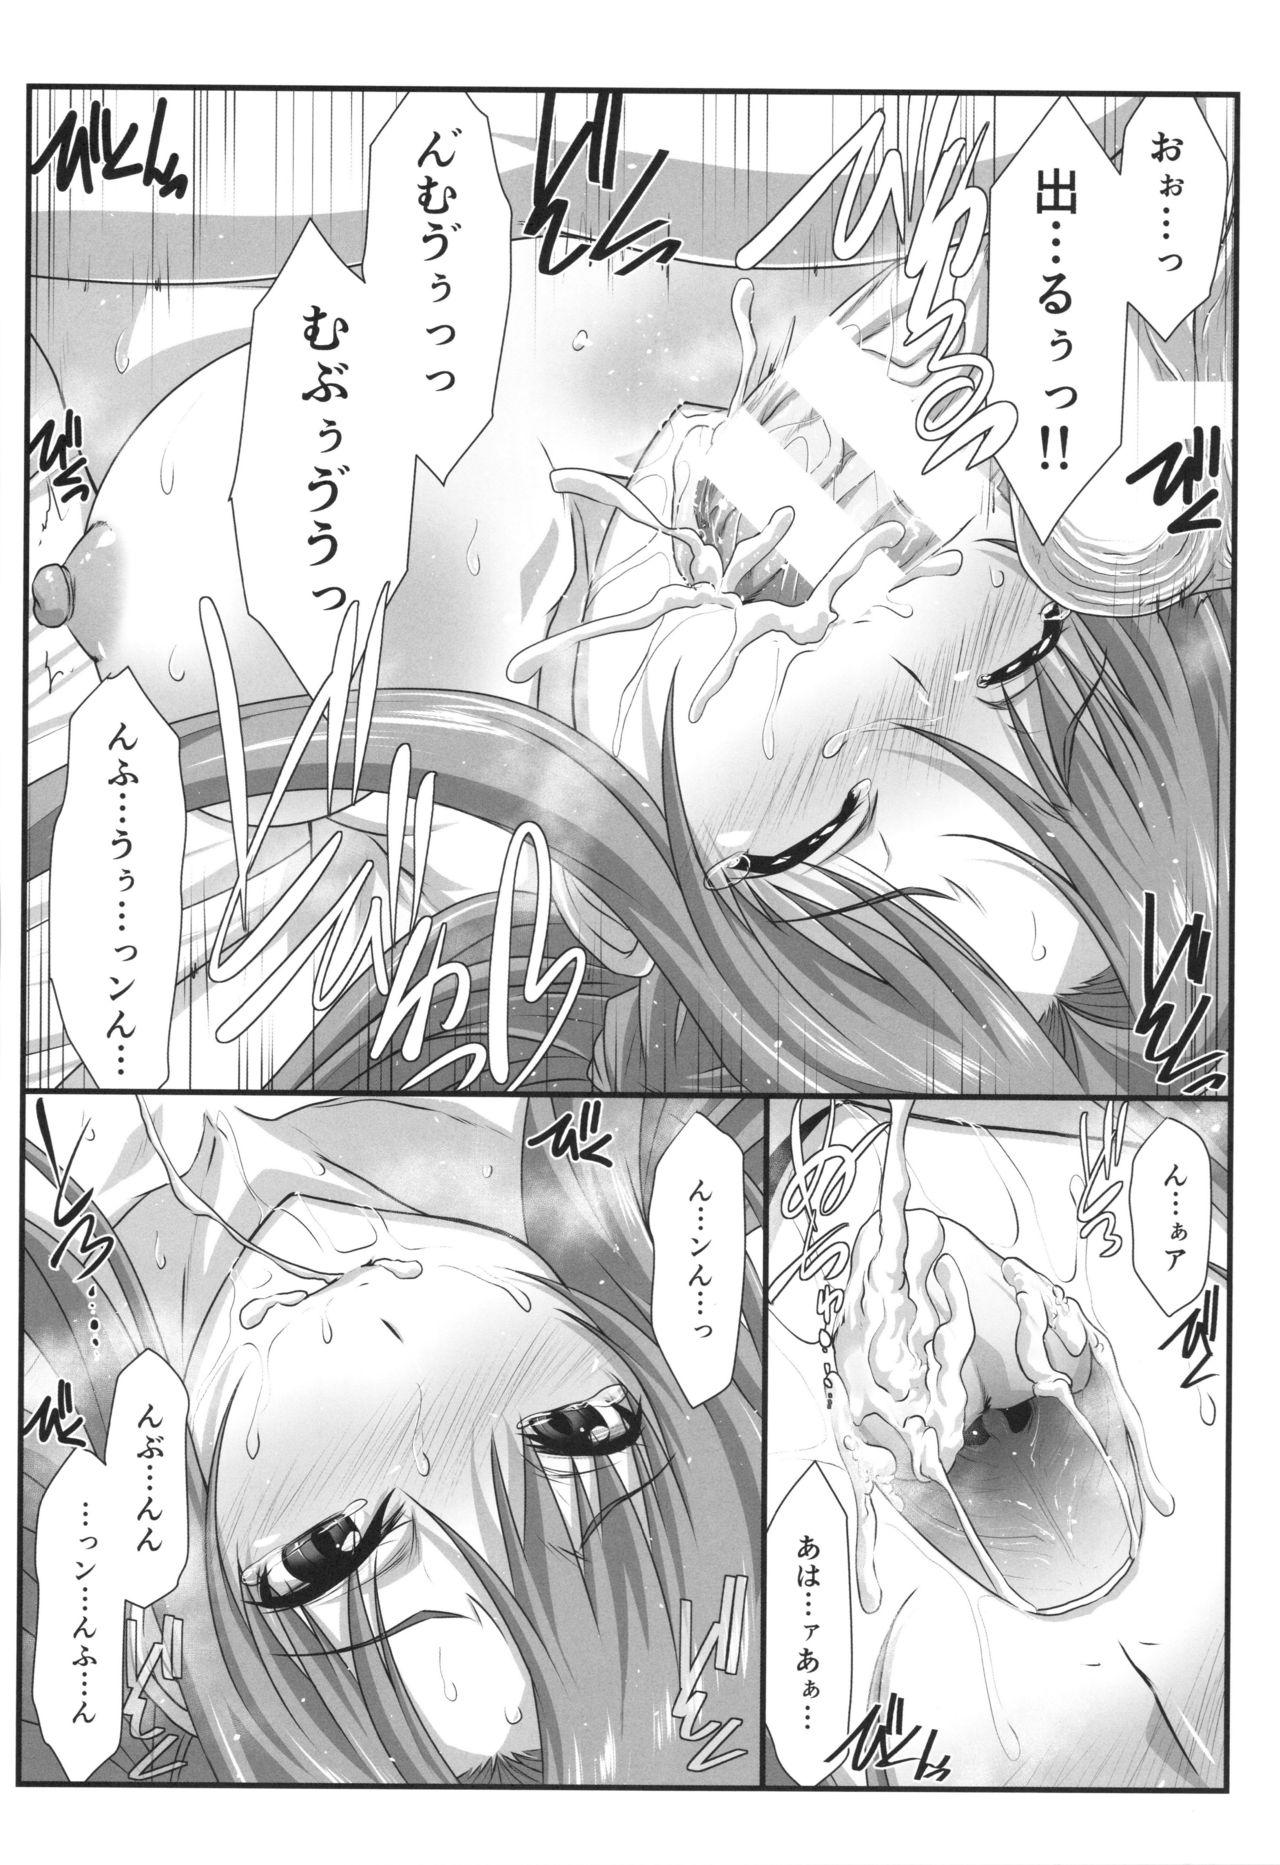 Rica Astral Bout Ver. 41 - Sword art online Teenage Sex - Page 9